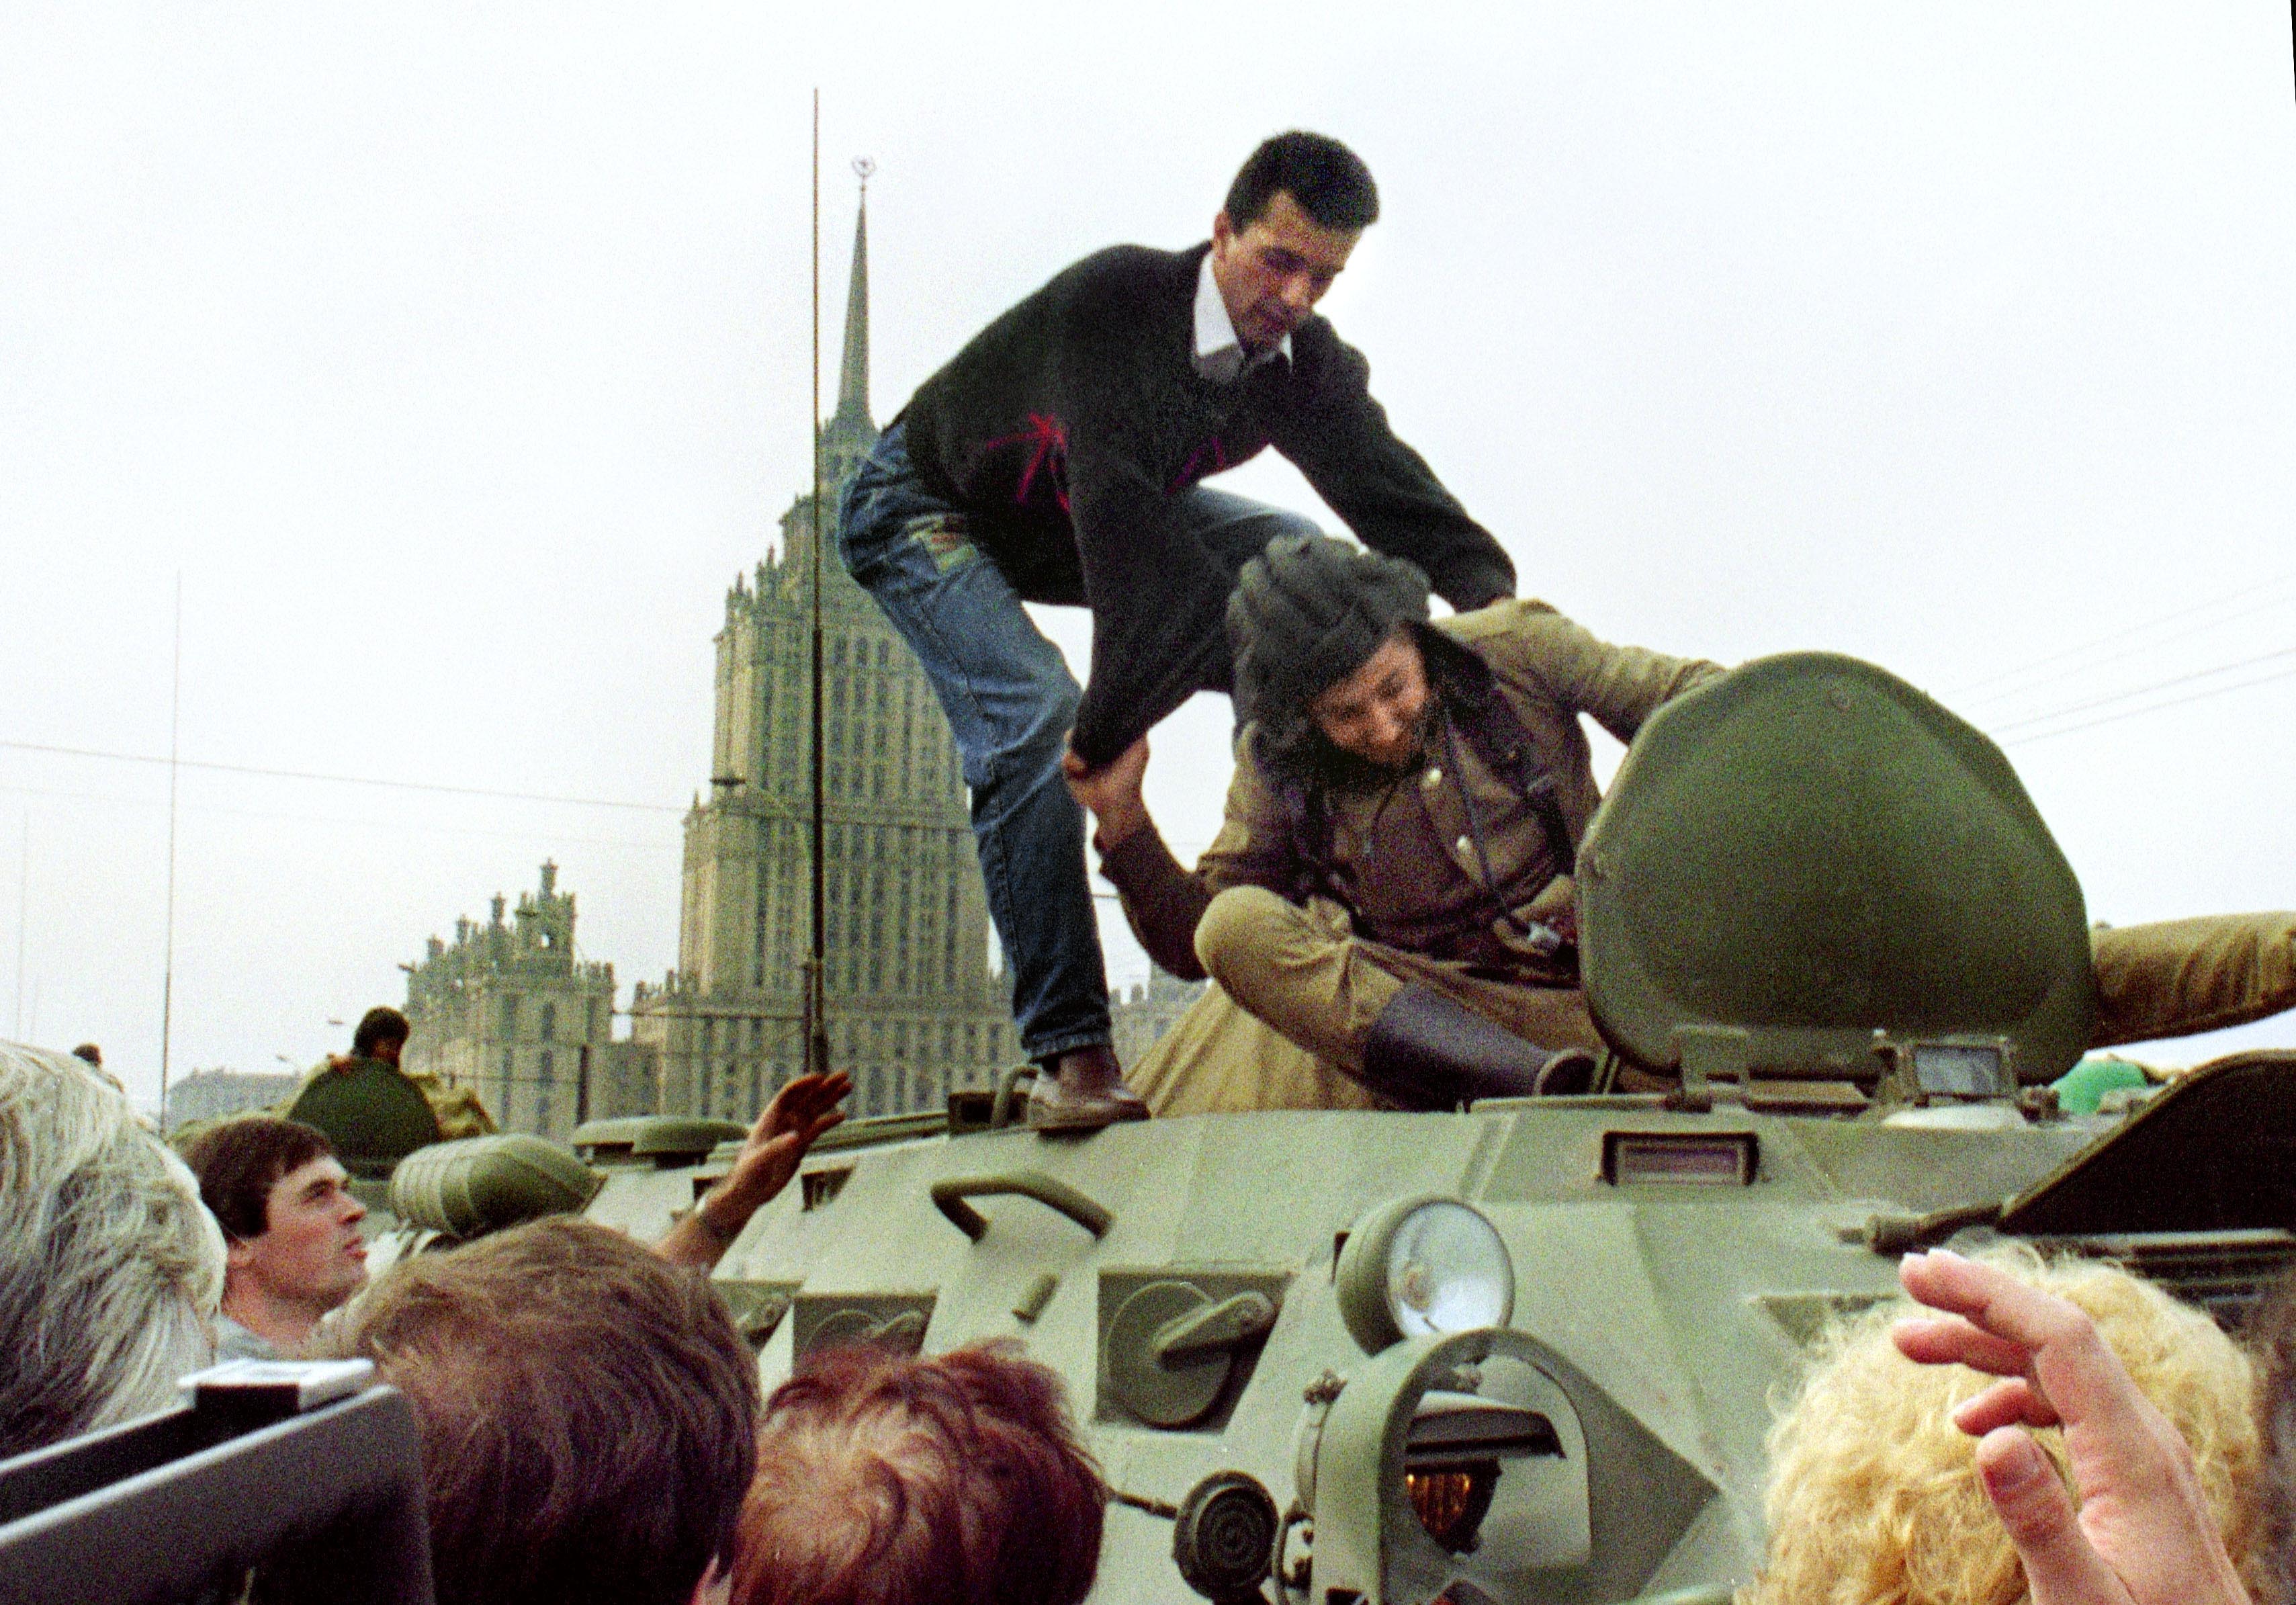 A pro-democracy demonstrator fights with a Soviet soldier on top of a tank parked in front of the Russian Federation building on 19 August 1991